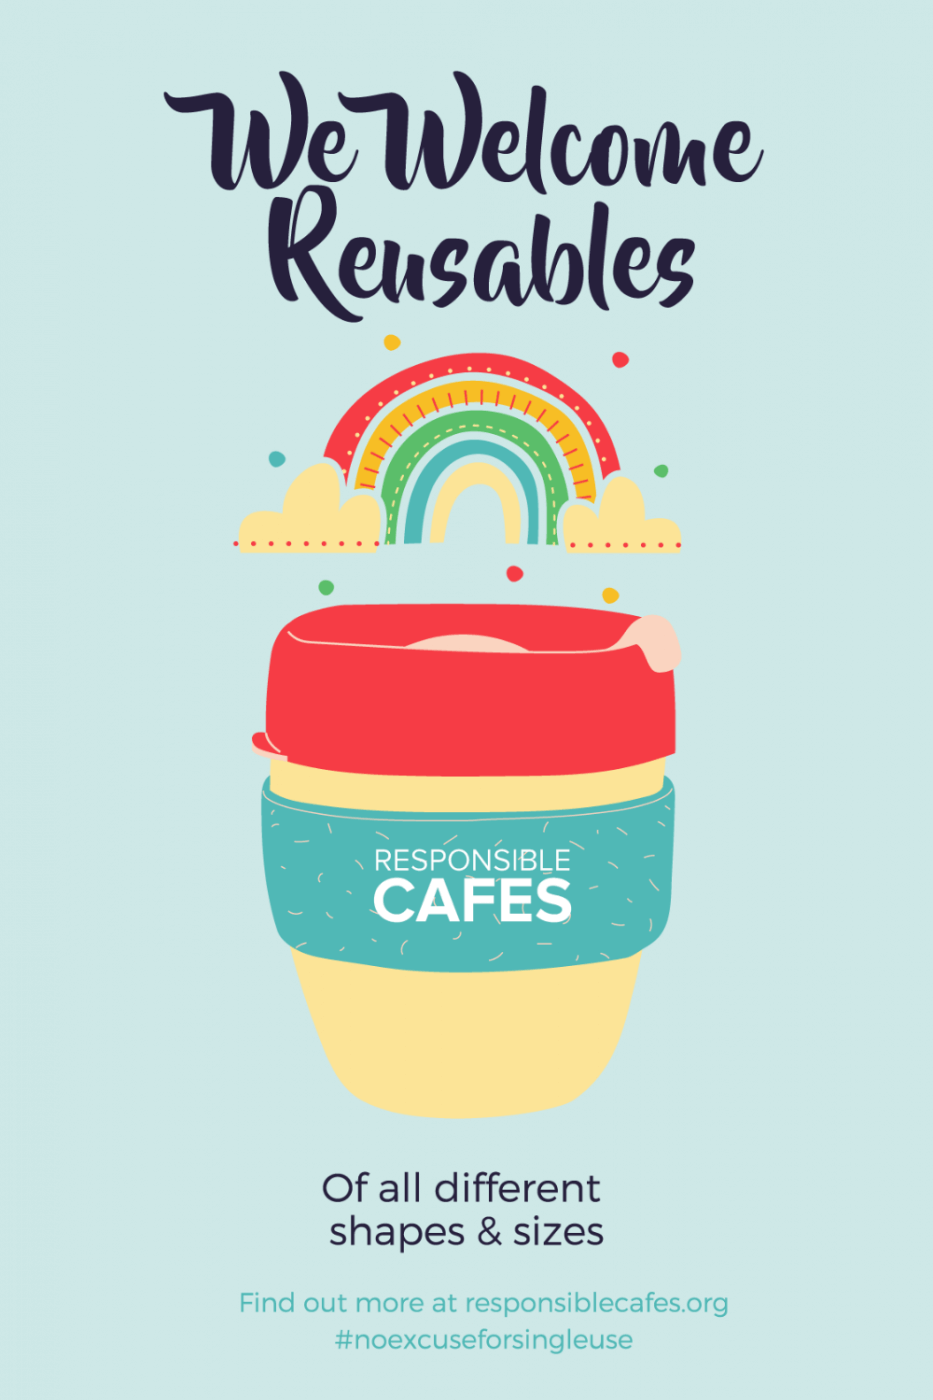 Promote Reusables by Engaging Customers, and use Responsible Cafes resources to communicate your mission